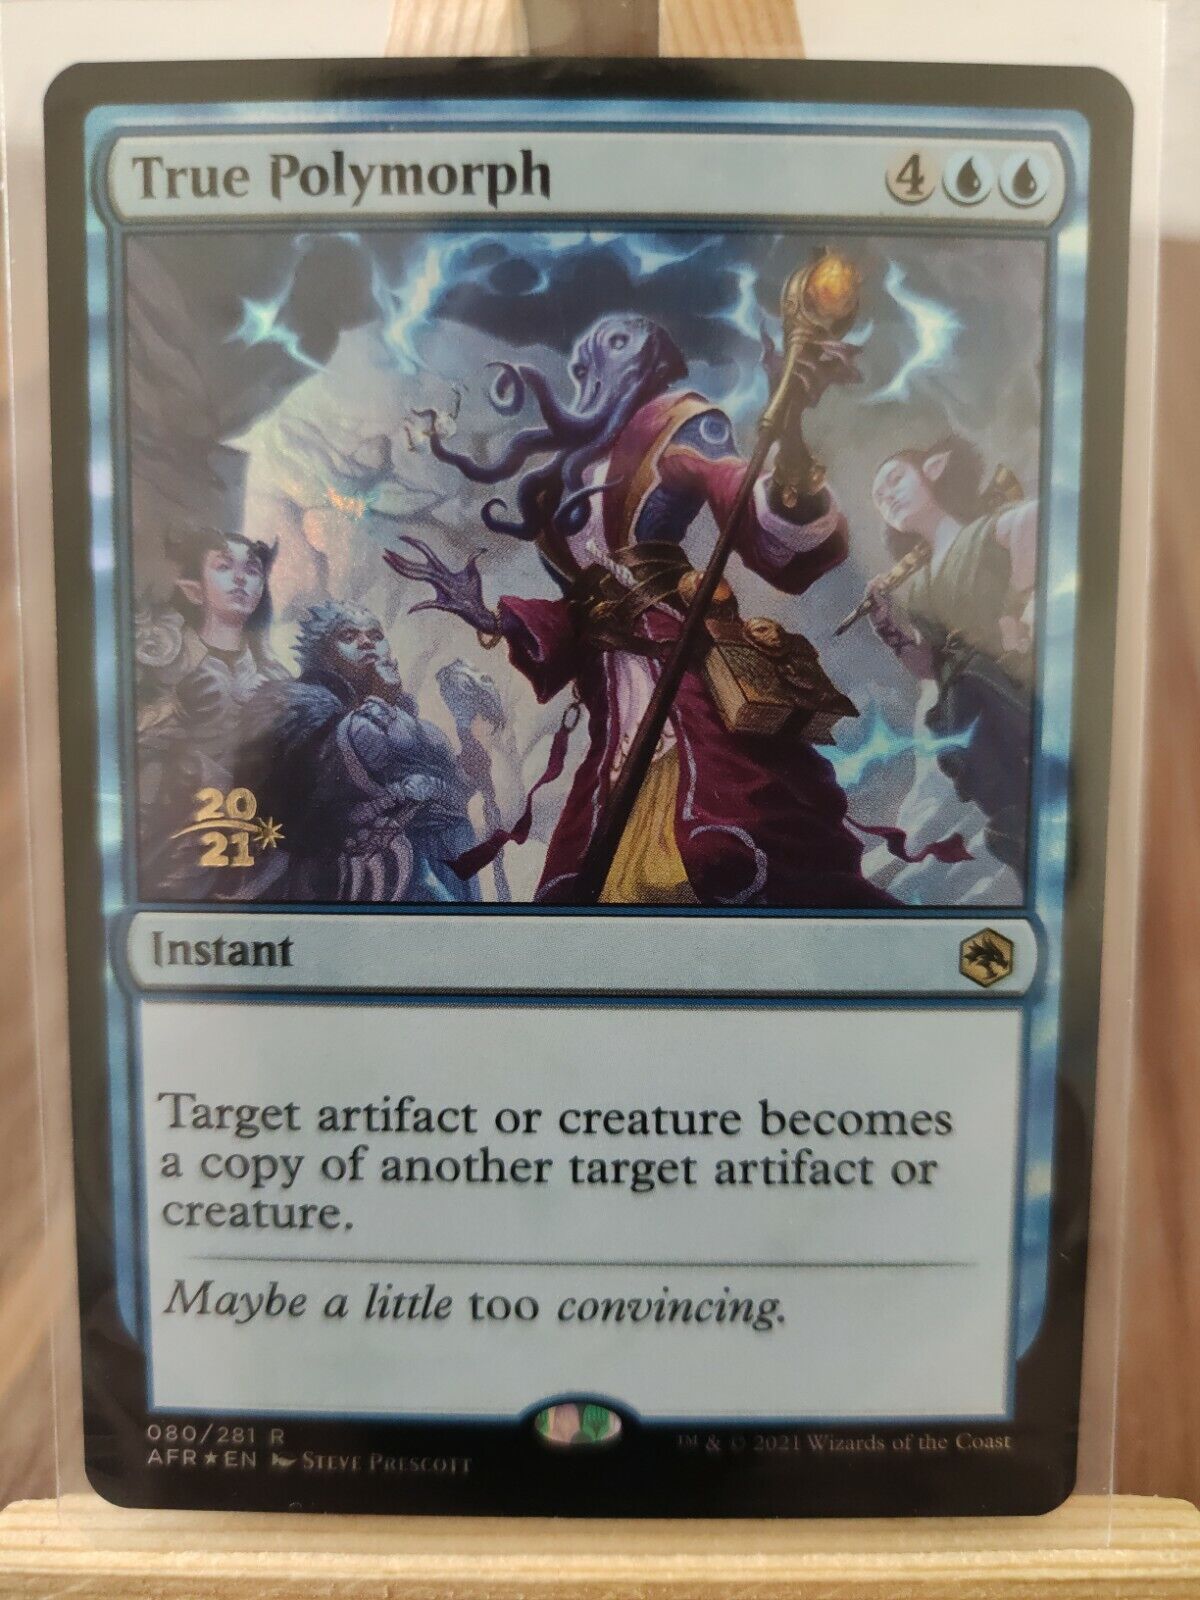 True Polymorph FOIL Promo 080/281 Adventures in the Forgotten Realm's MTG Card